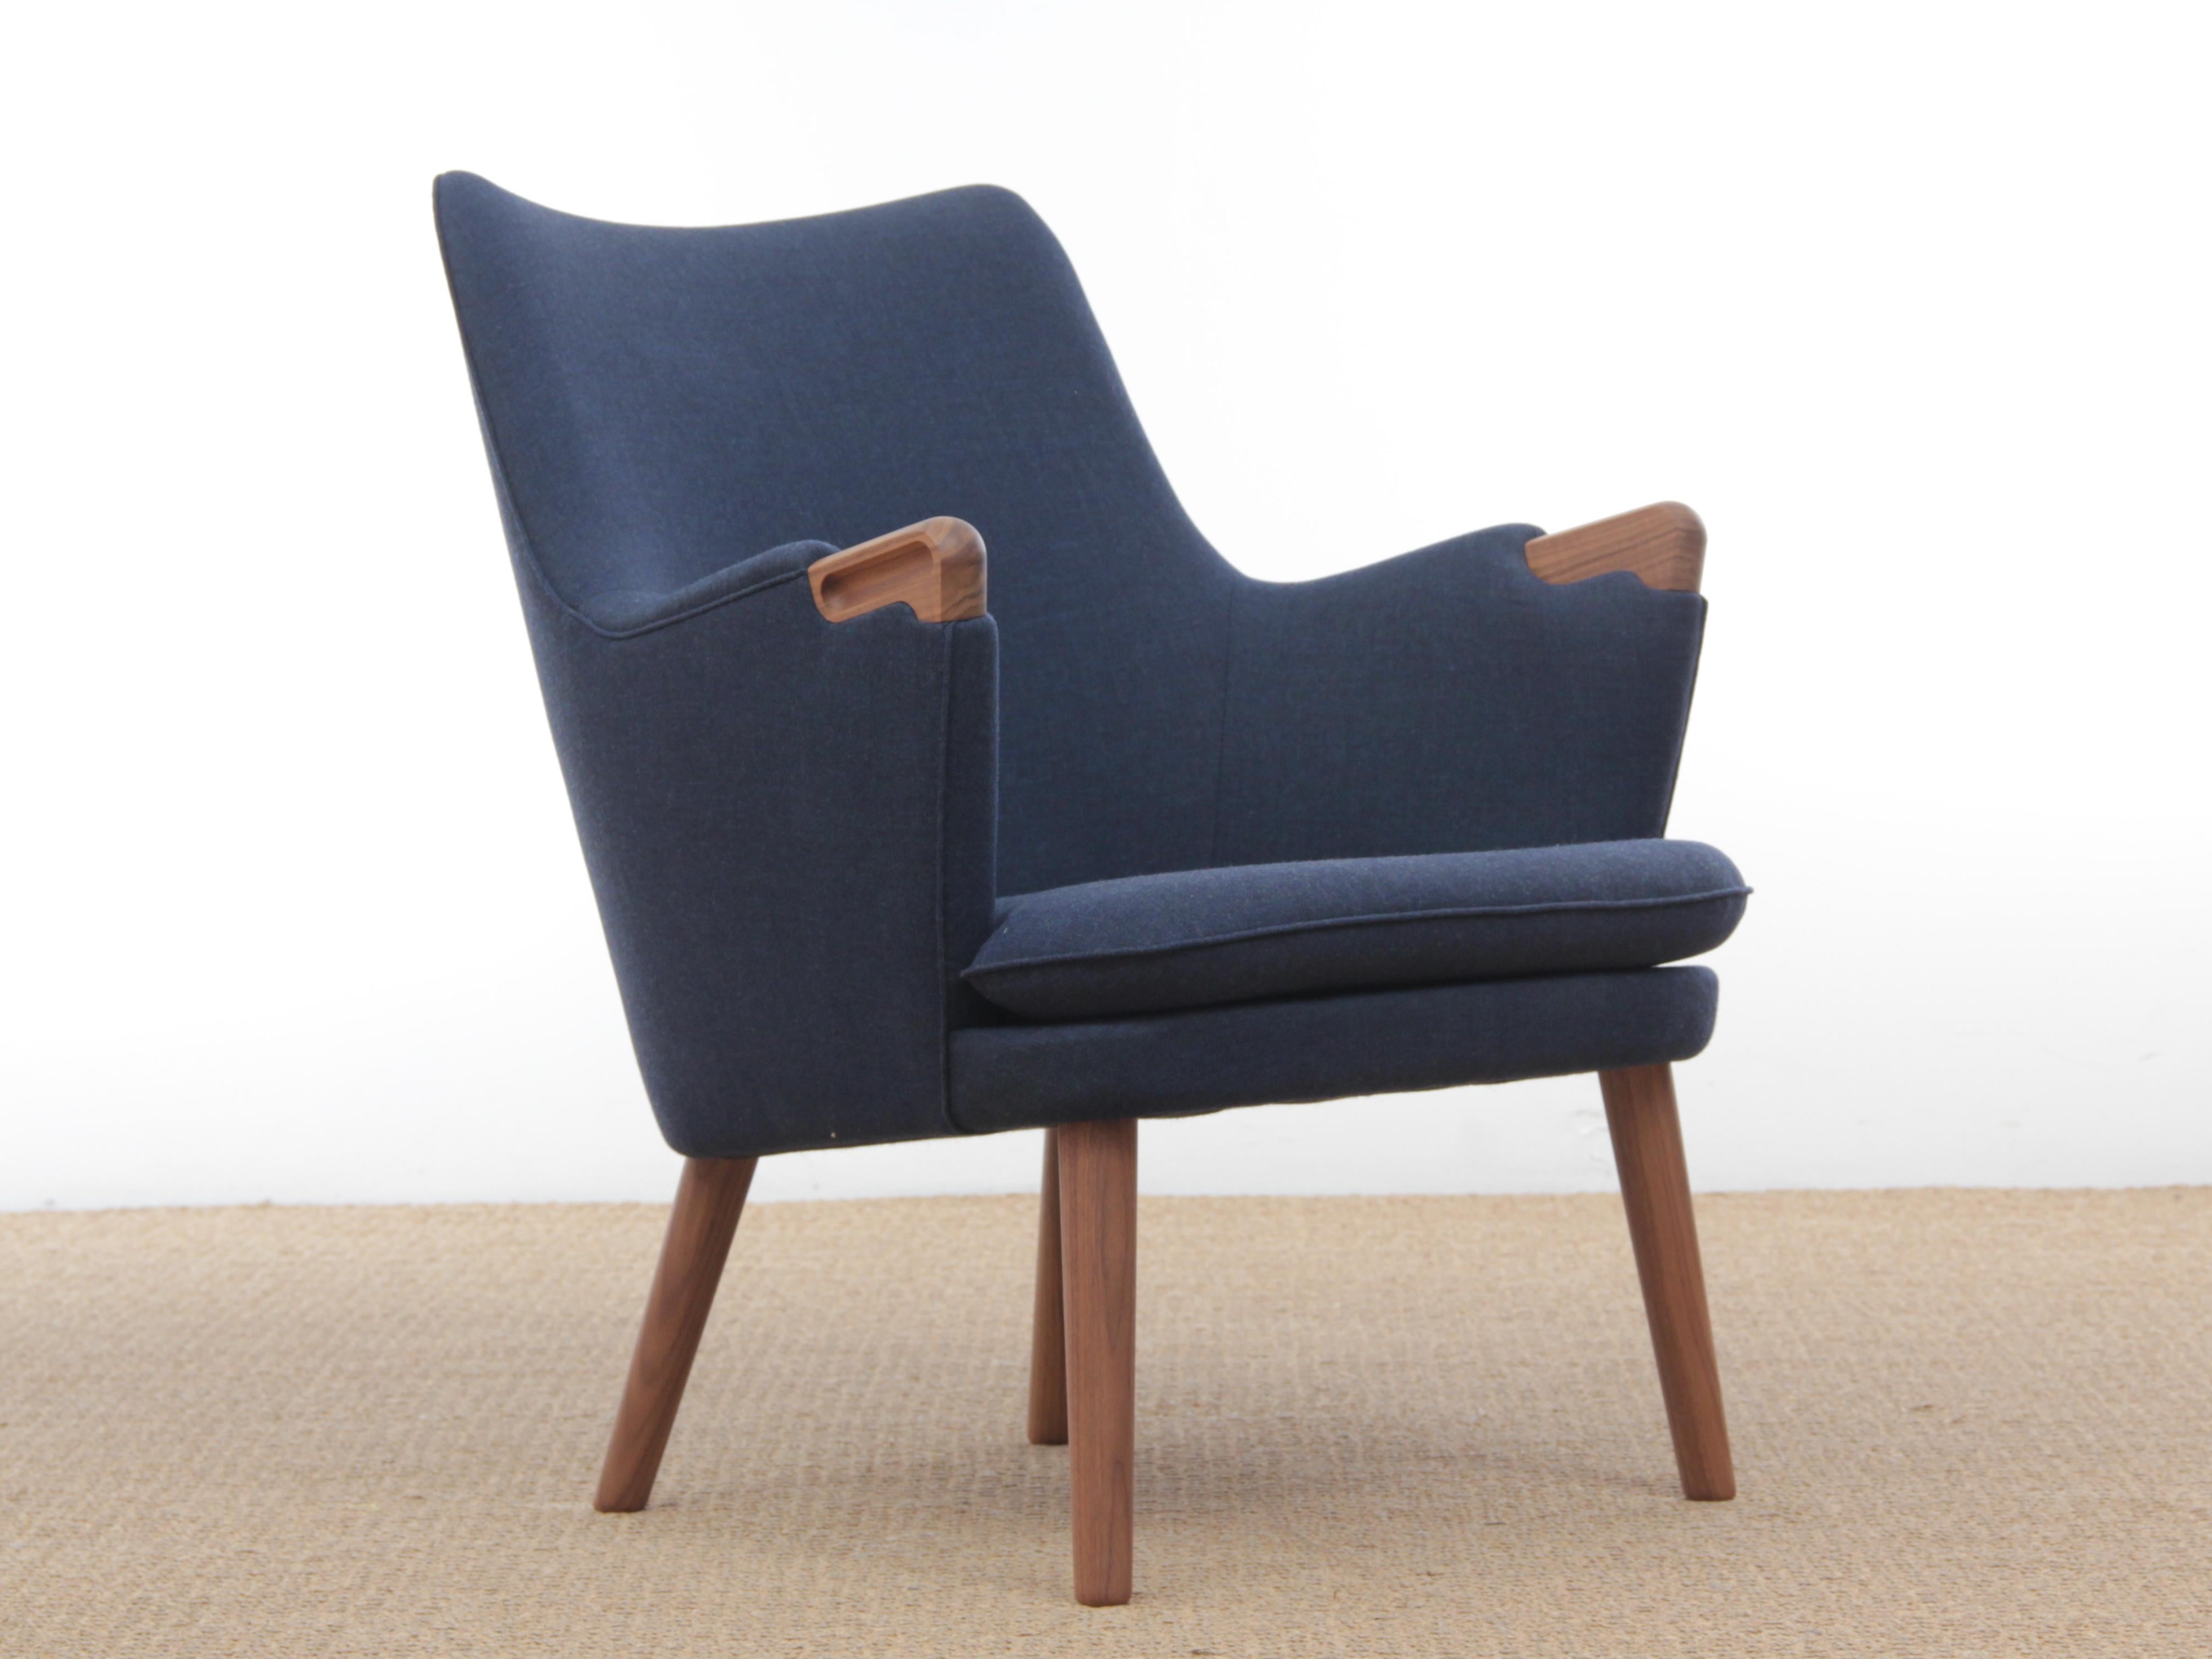 Mid-Century Modern Danish lounge chair model CH 71 by Hans Wegner. New production
With its slender frame and flowing, sculptural form, Hans J. Wegner’s CH71 lounge chair is a testament to the legendary Danish designer’s unique understanding of